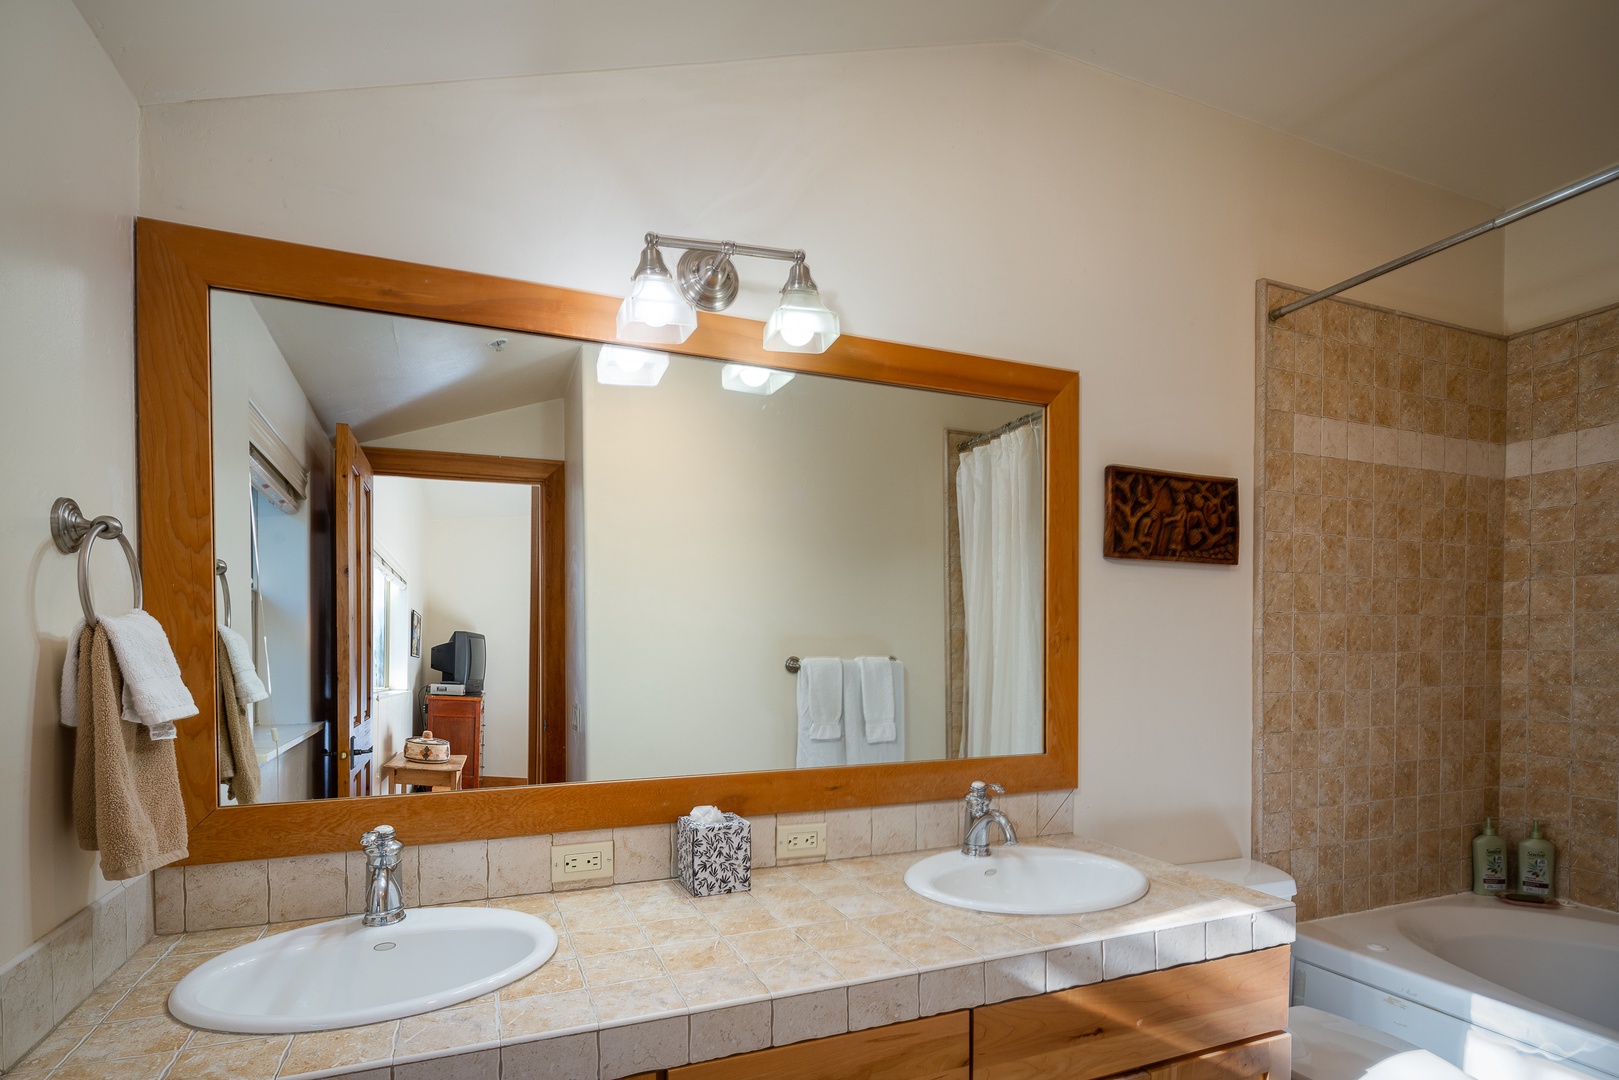 Ketchum Vacation Rentals, Bridgepoint Charm - The Primary Bedroom ensuite boasts a dual vanity